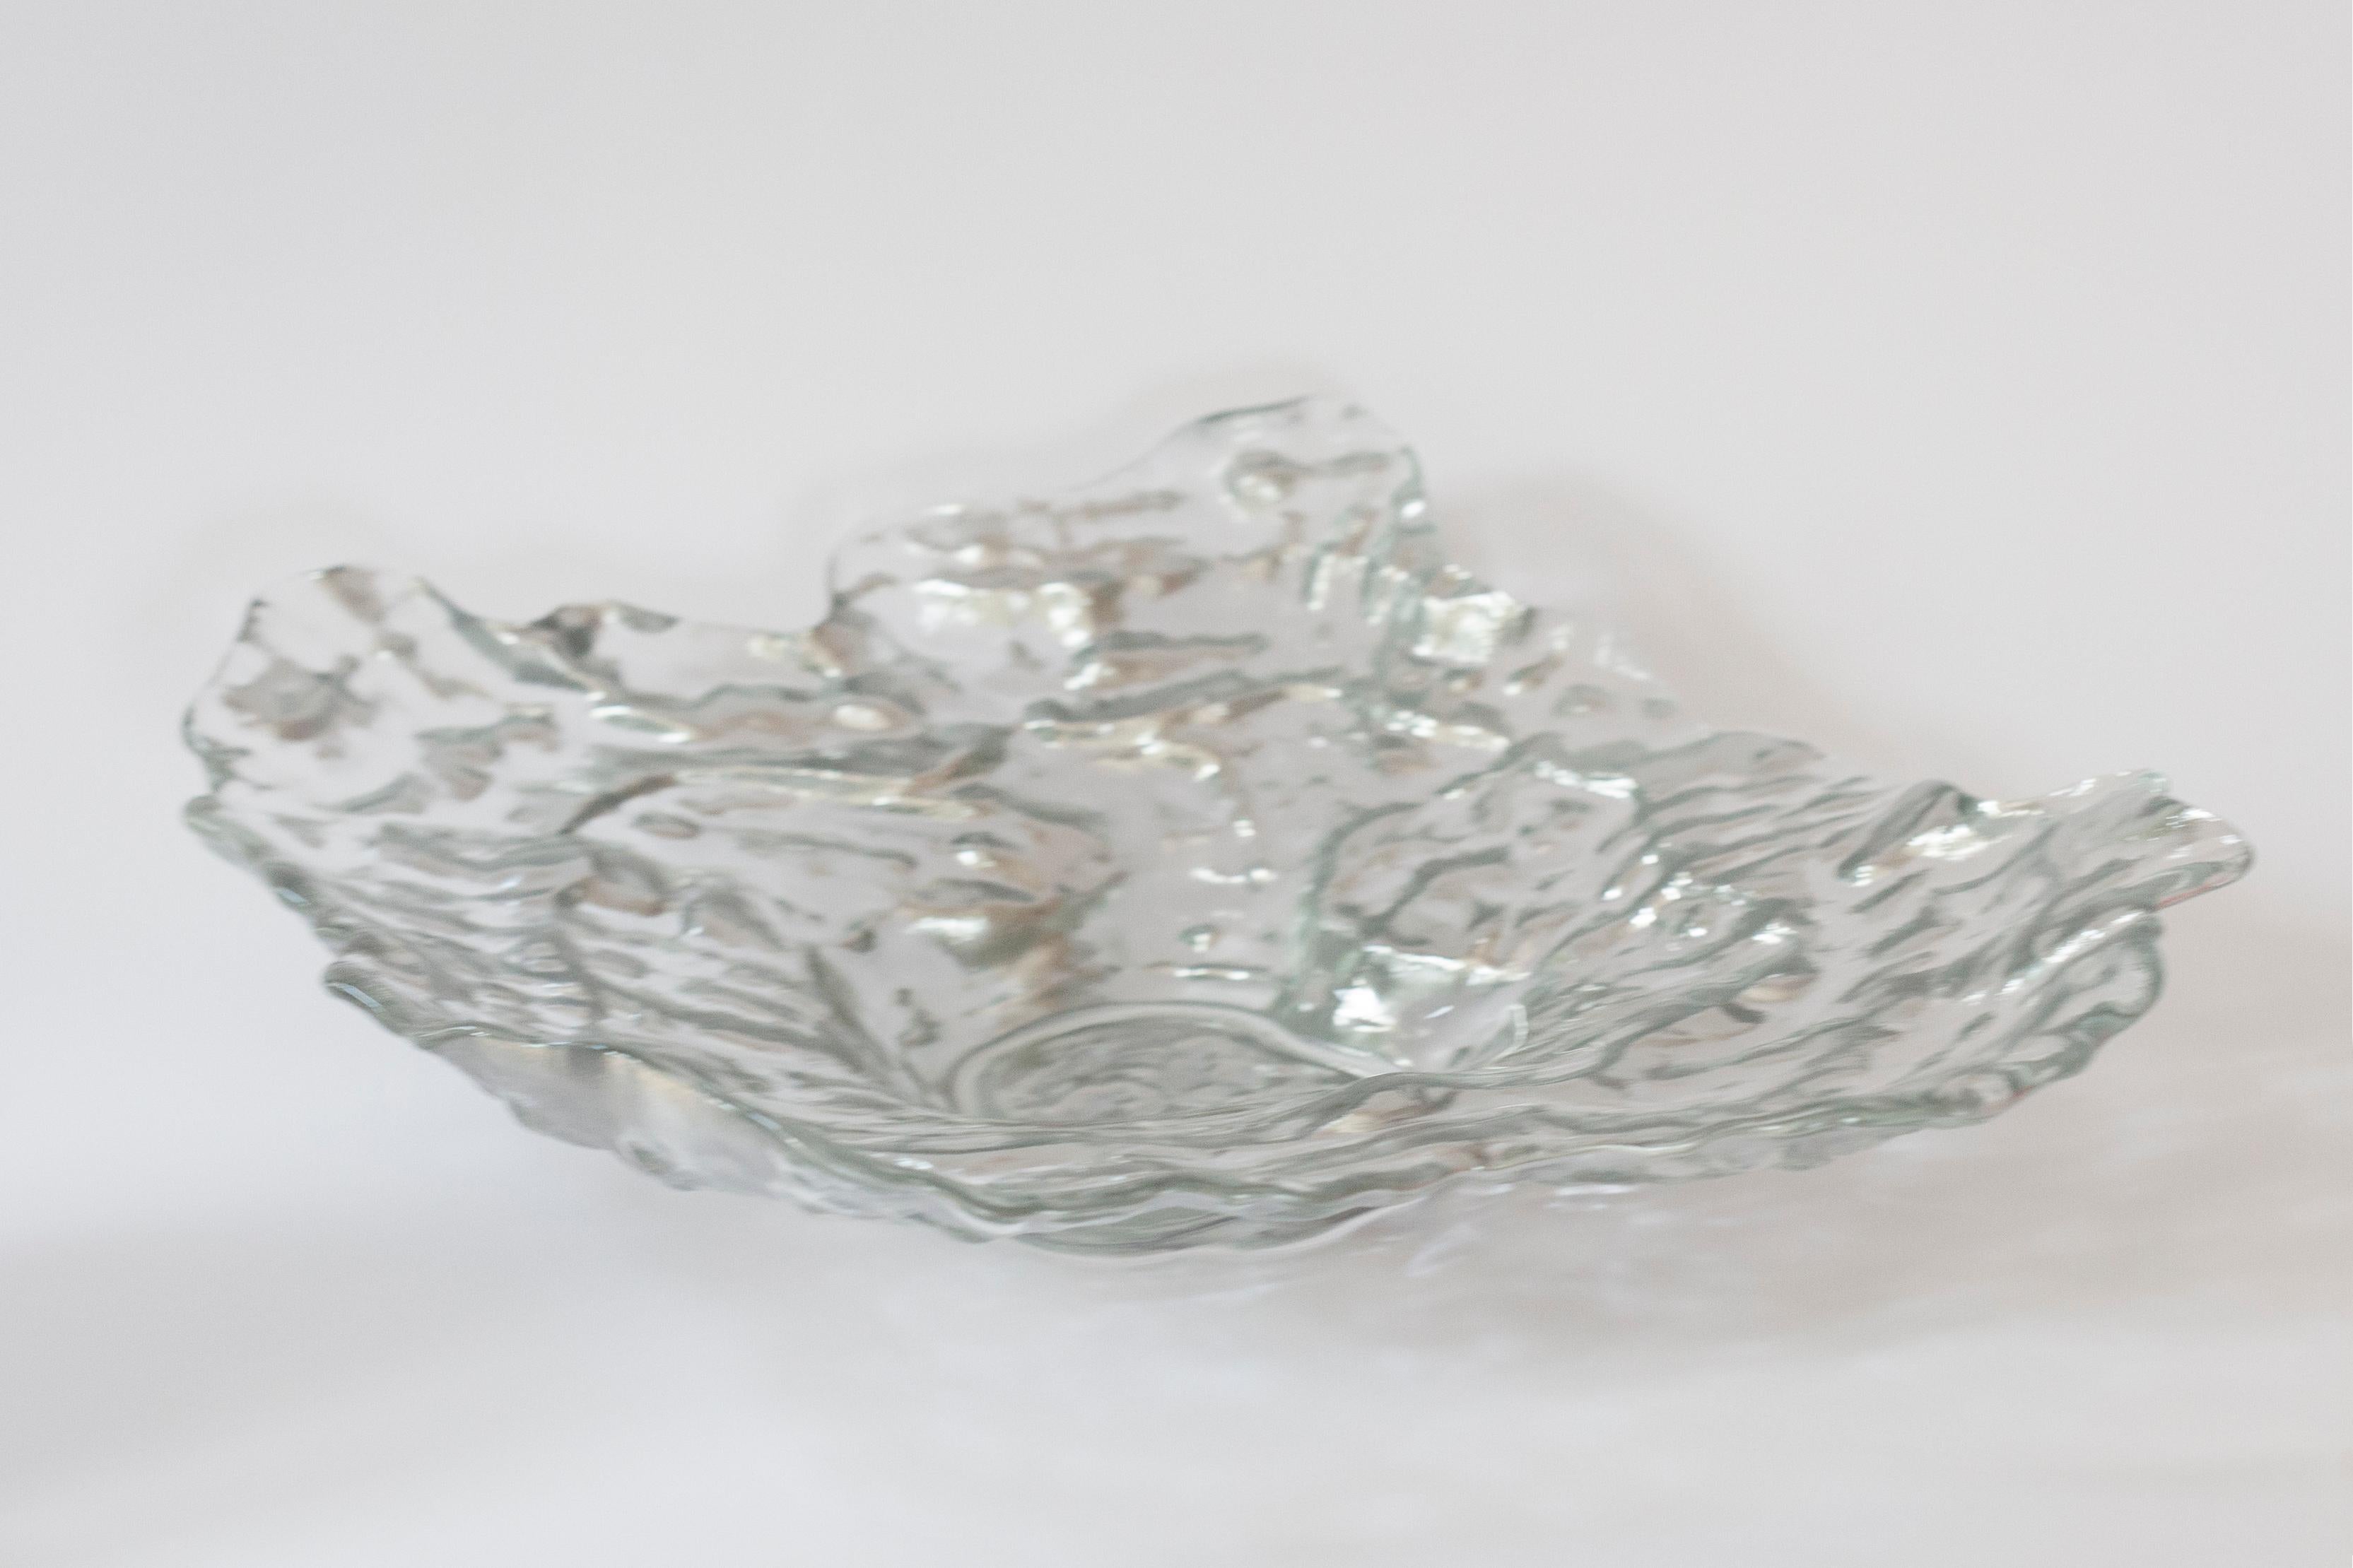 This original vintage glass element was designed and produced in the 1970s in Lombardia, Italy. It is made in Sommerso Technique and has a fantastic faceted form. The vibrant silver color makes this items highly decorative. This item is a high